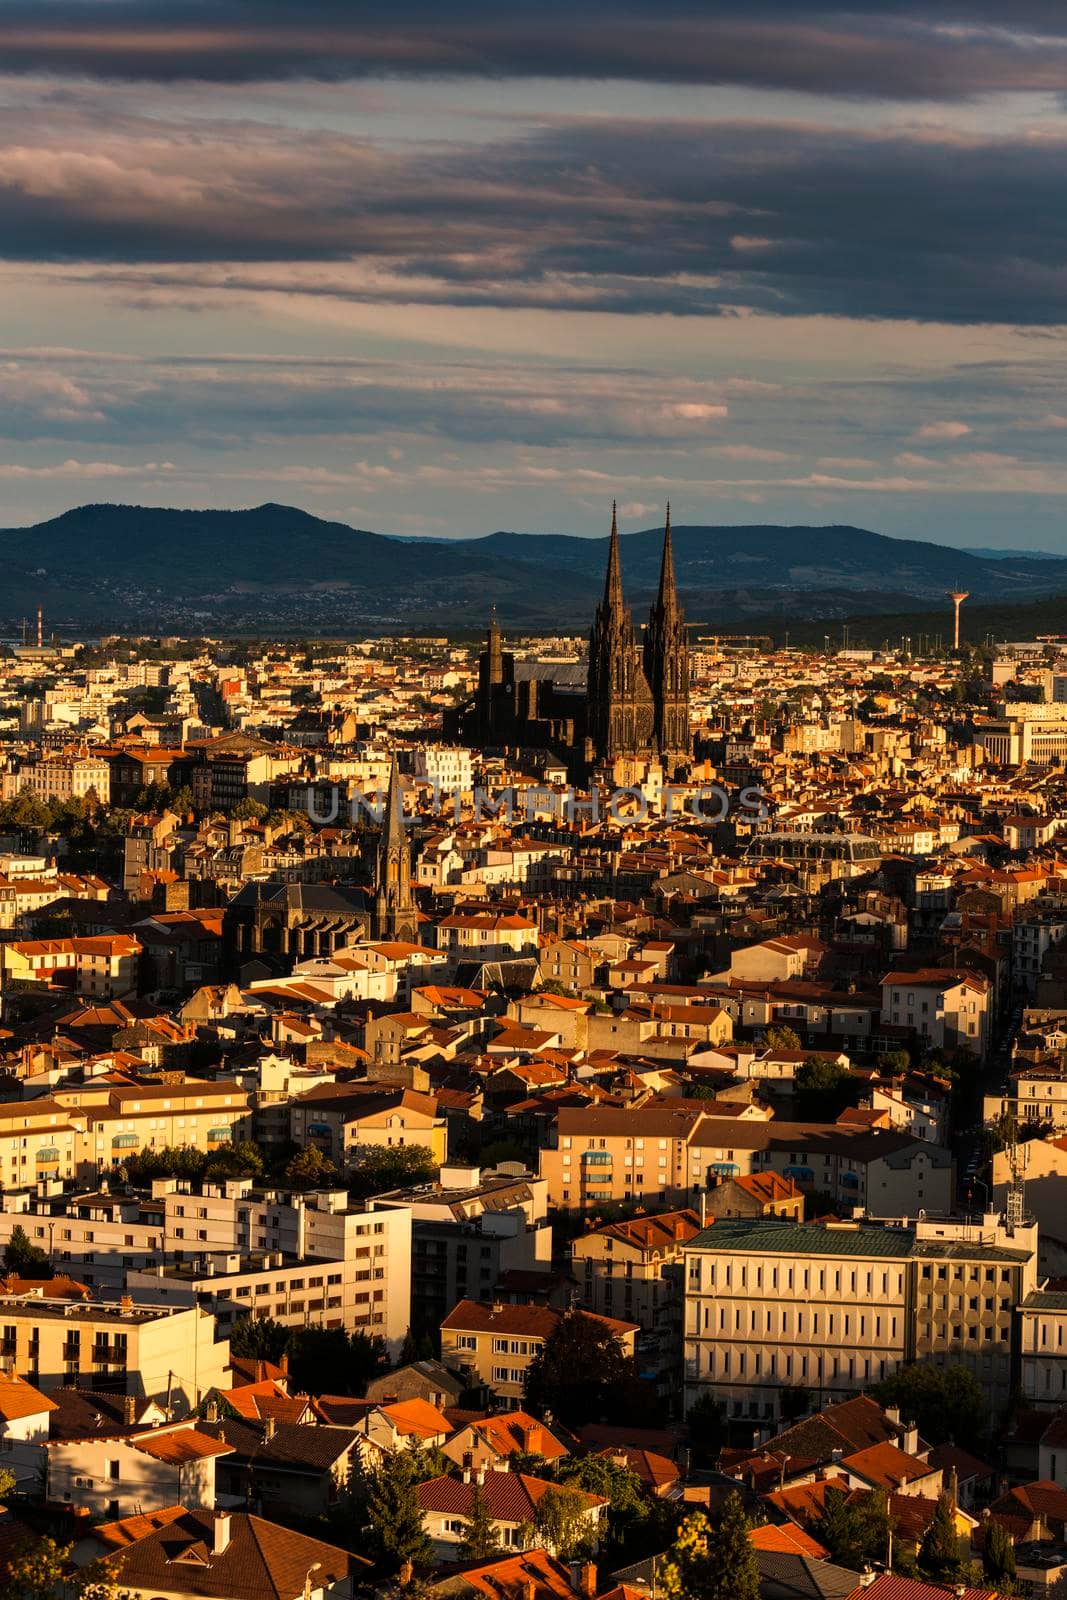 Architecture of Clermont-Ferrand - aerial panorama. Clermont-Ferrand, Auvergne-Rhone-Alpes, France.